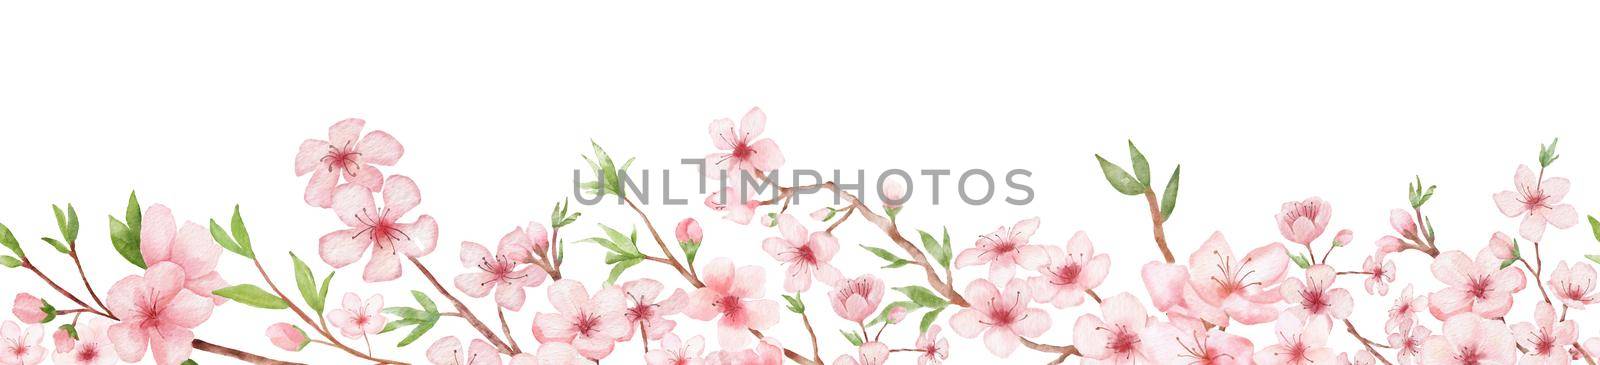 Branch of Cherry blossom watercolor seamless border on white backgraund. Japanese flowers frame. Floral pink background